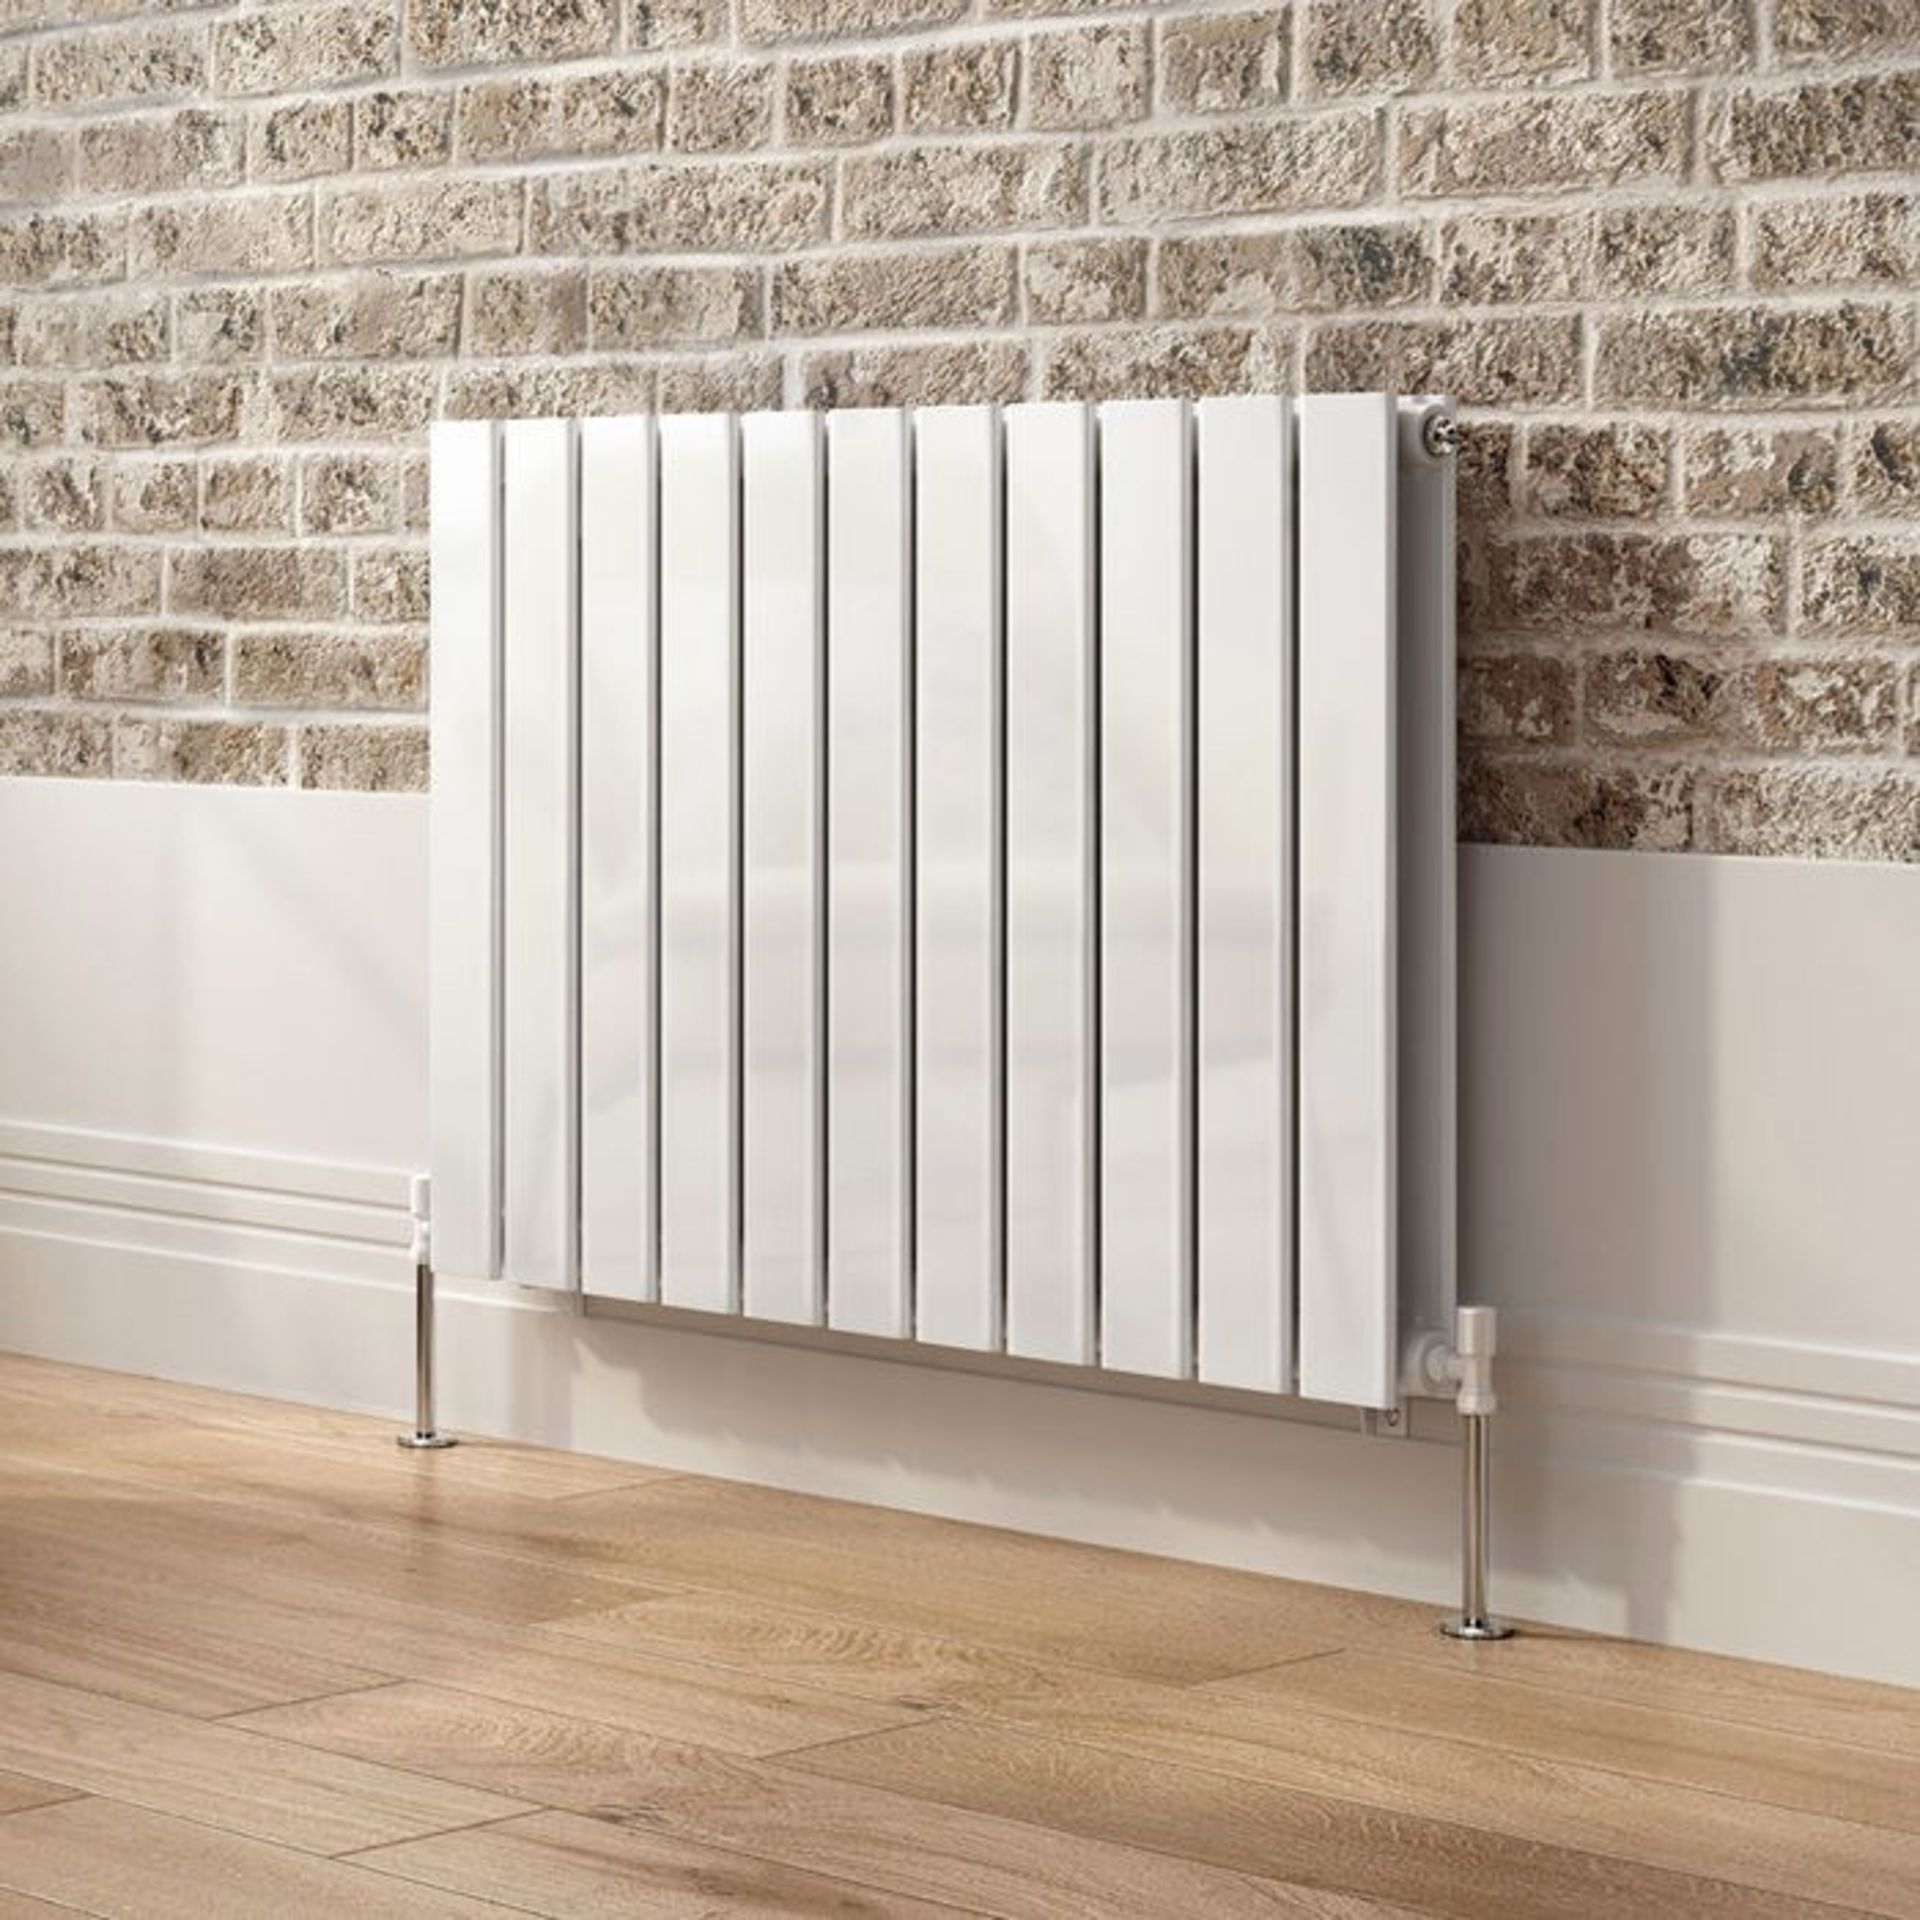 600x830mm Gloss White Double Flat Panel Horizontal Radiator. RRP £474.99.RC221.Made with... - Image 3 of 3